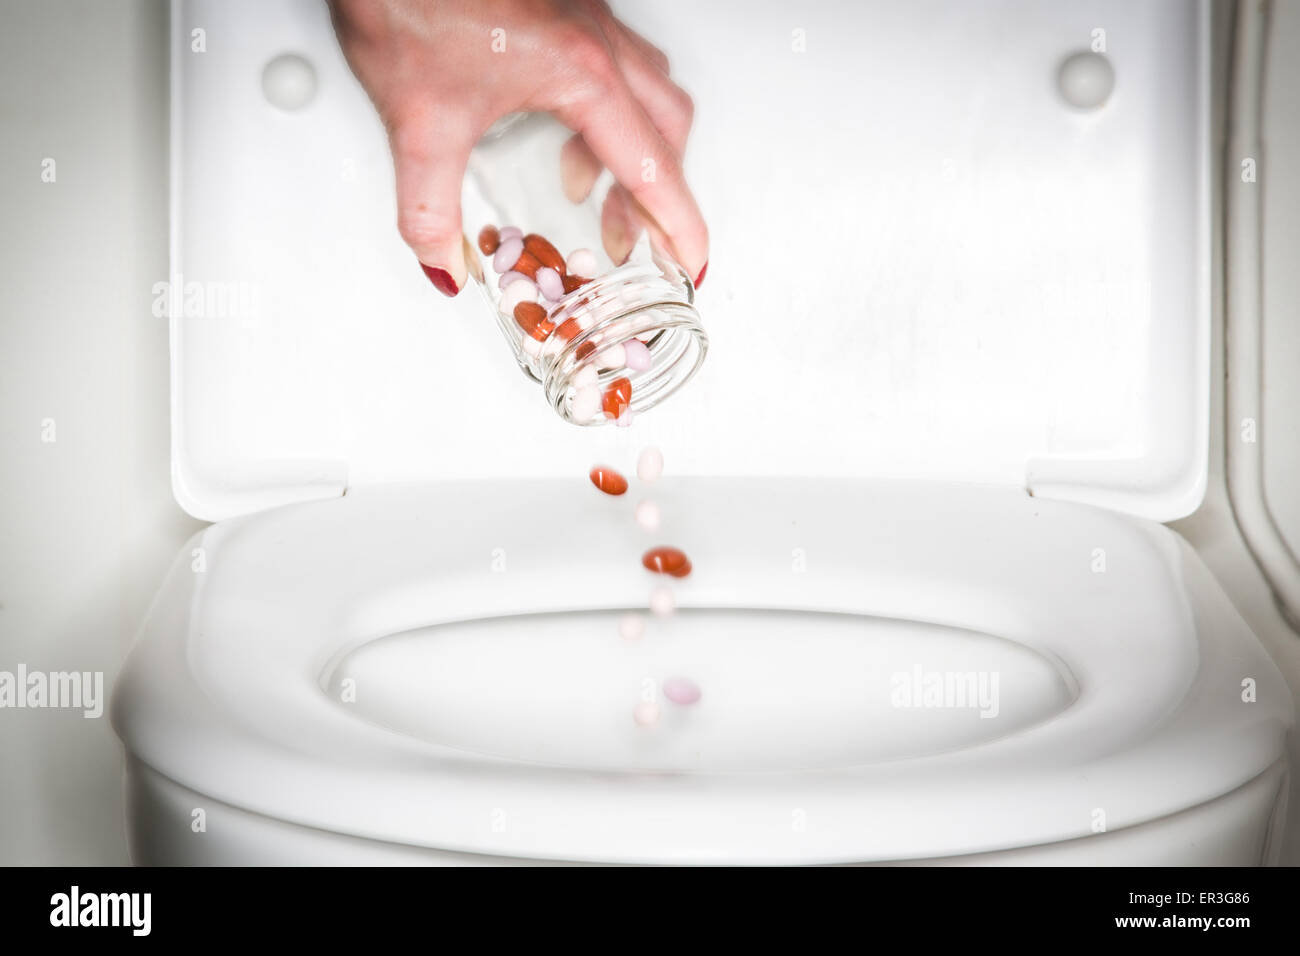 Hand throwing pills down a toilet. Stock Photo